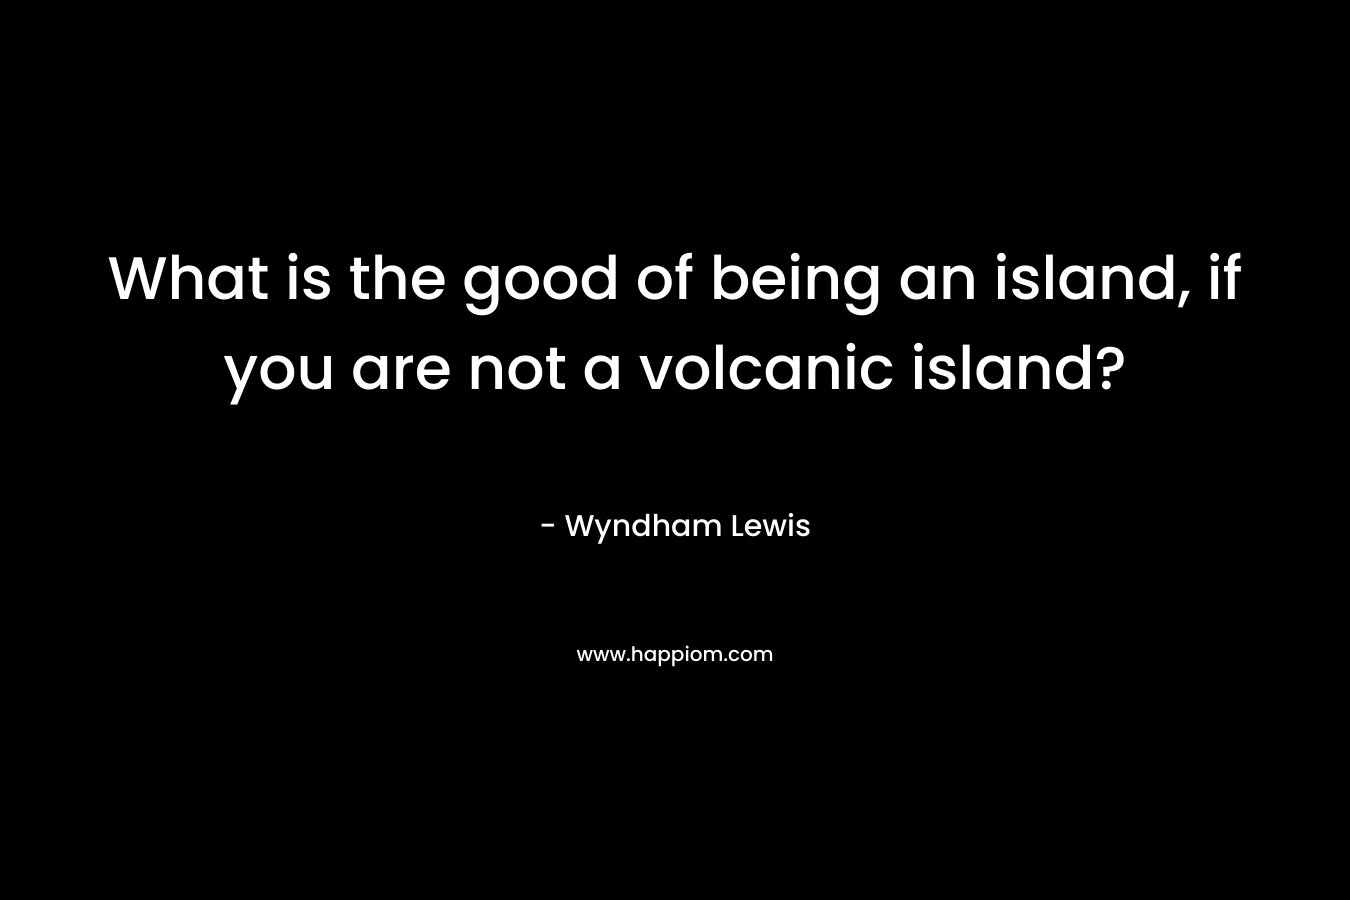 What is the good of being an island, if you are not a volcanic island?